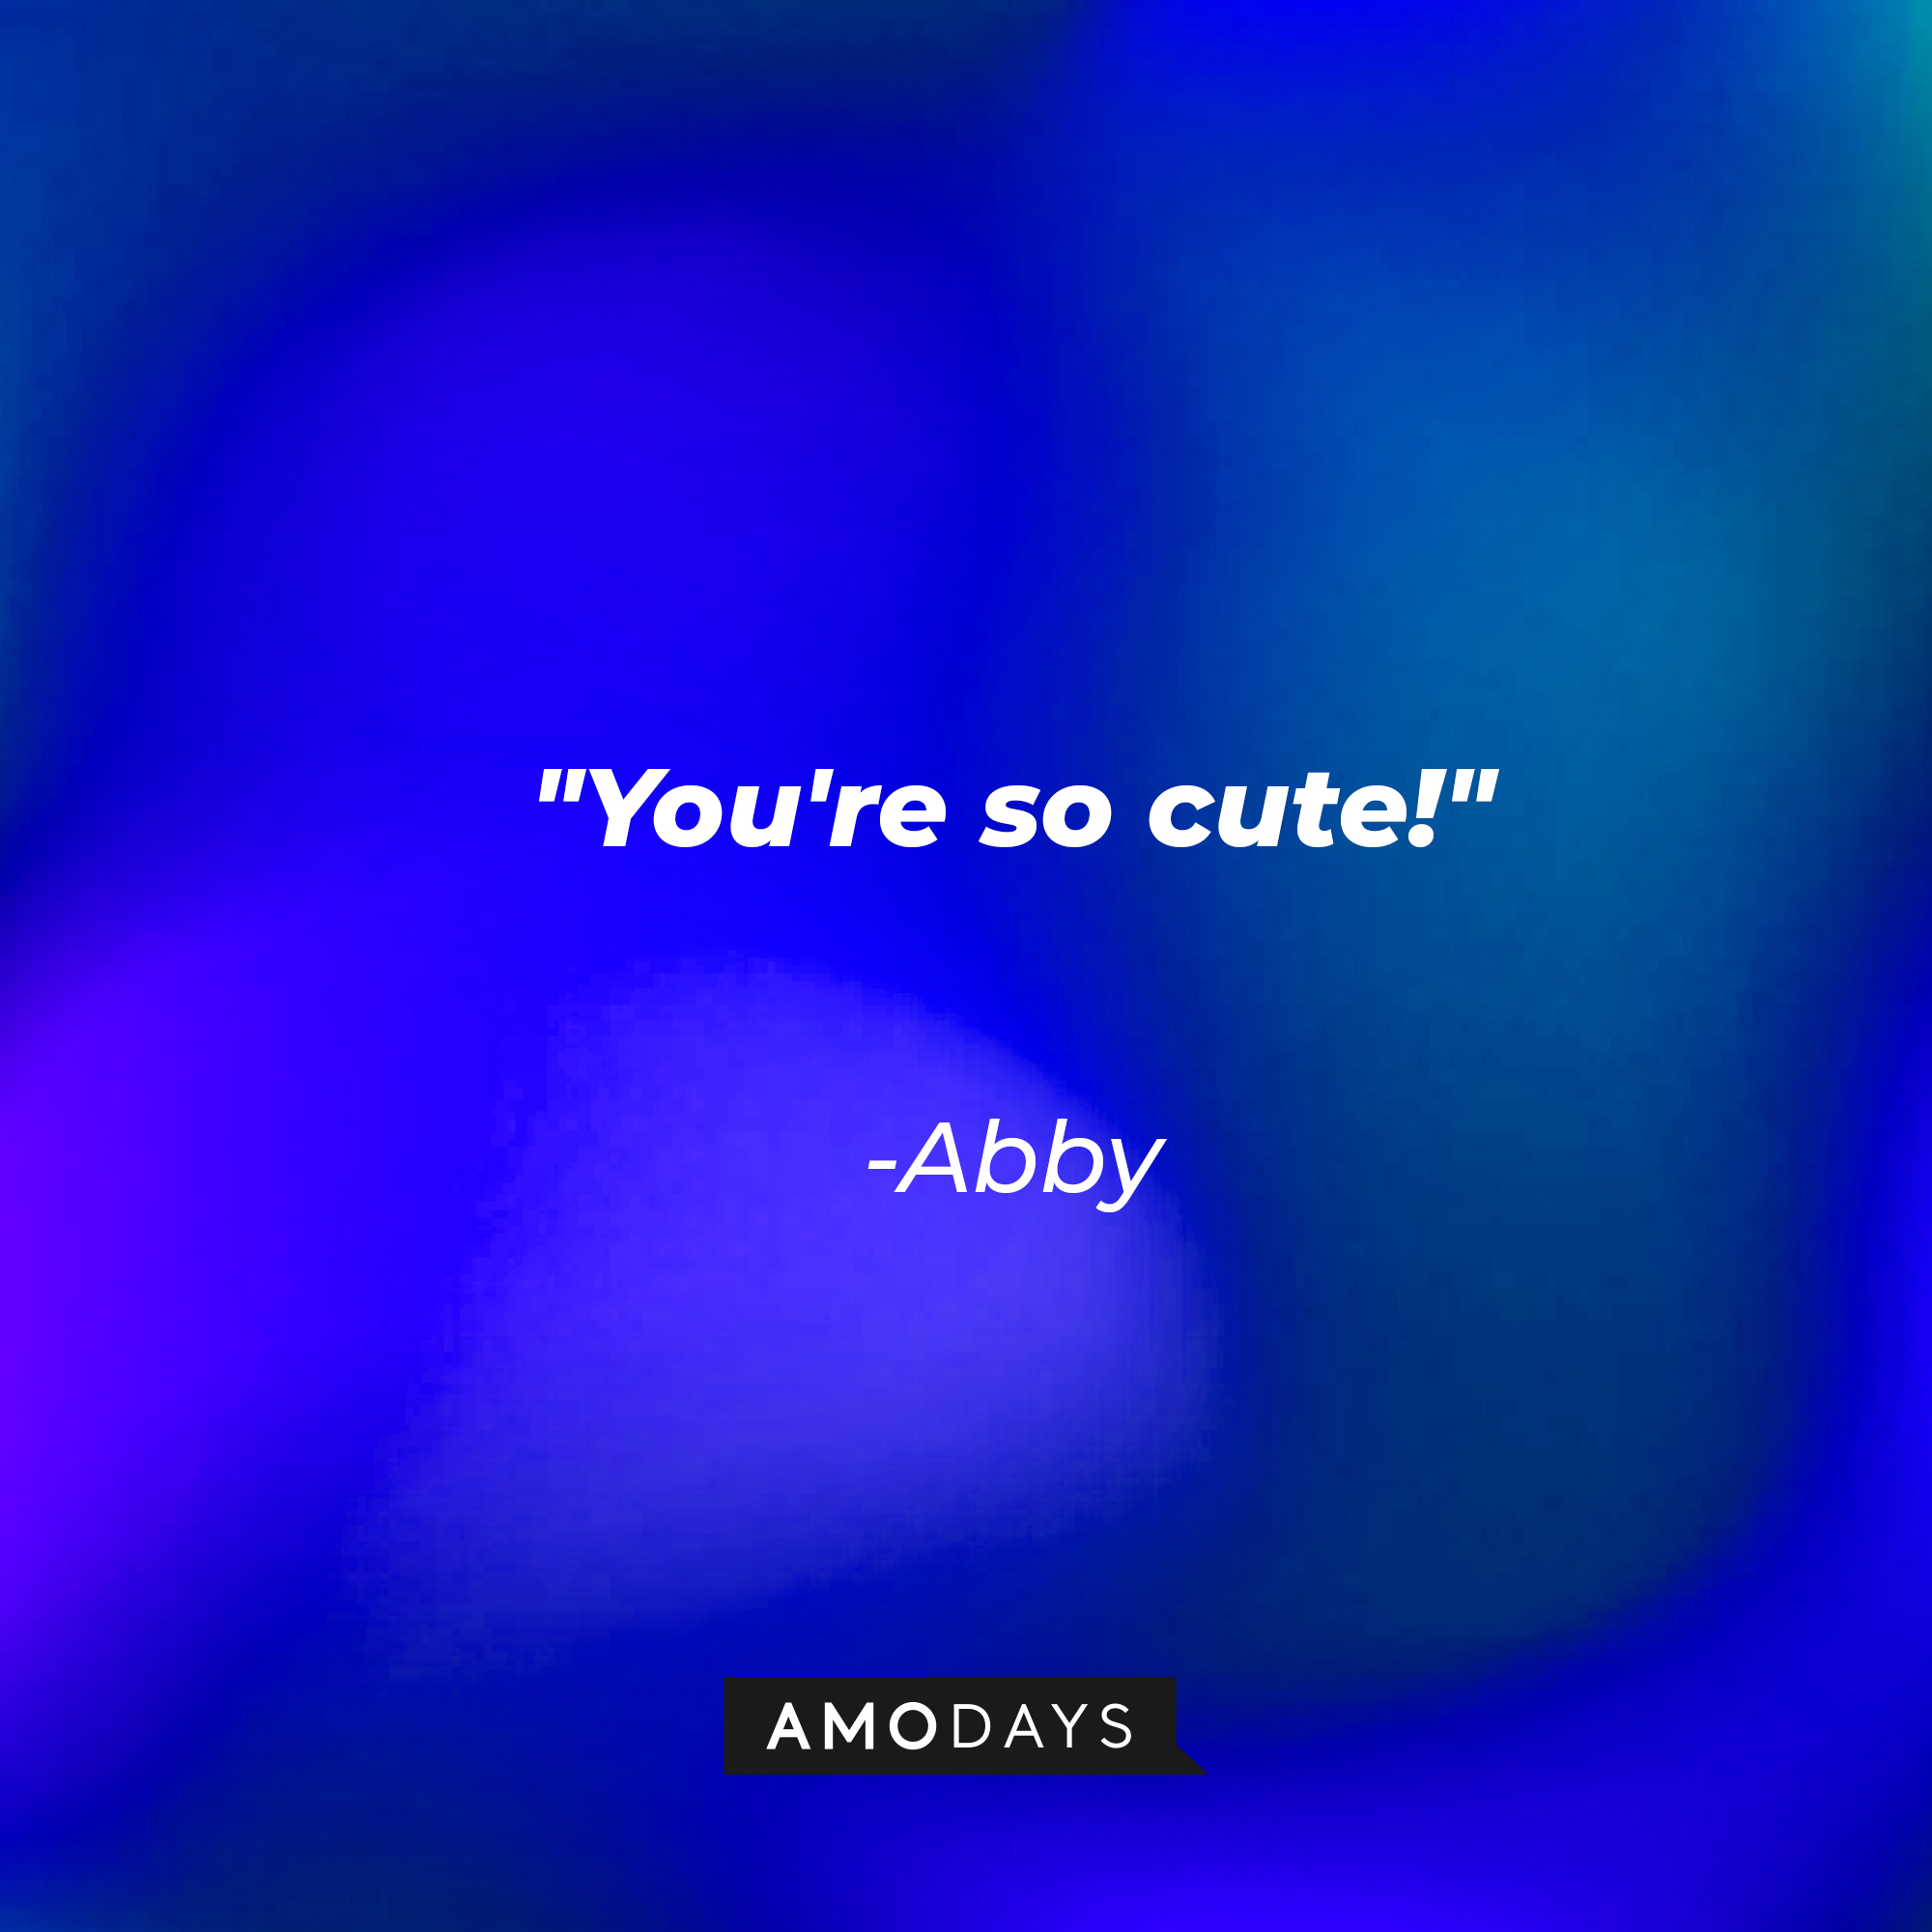 Abby's quote: "You're so cute!" | Source: AmoDays